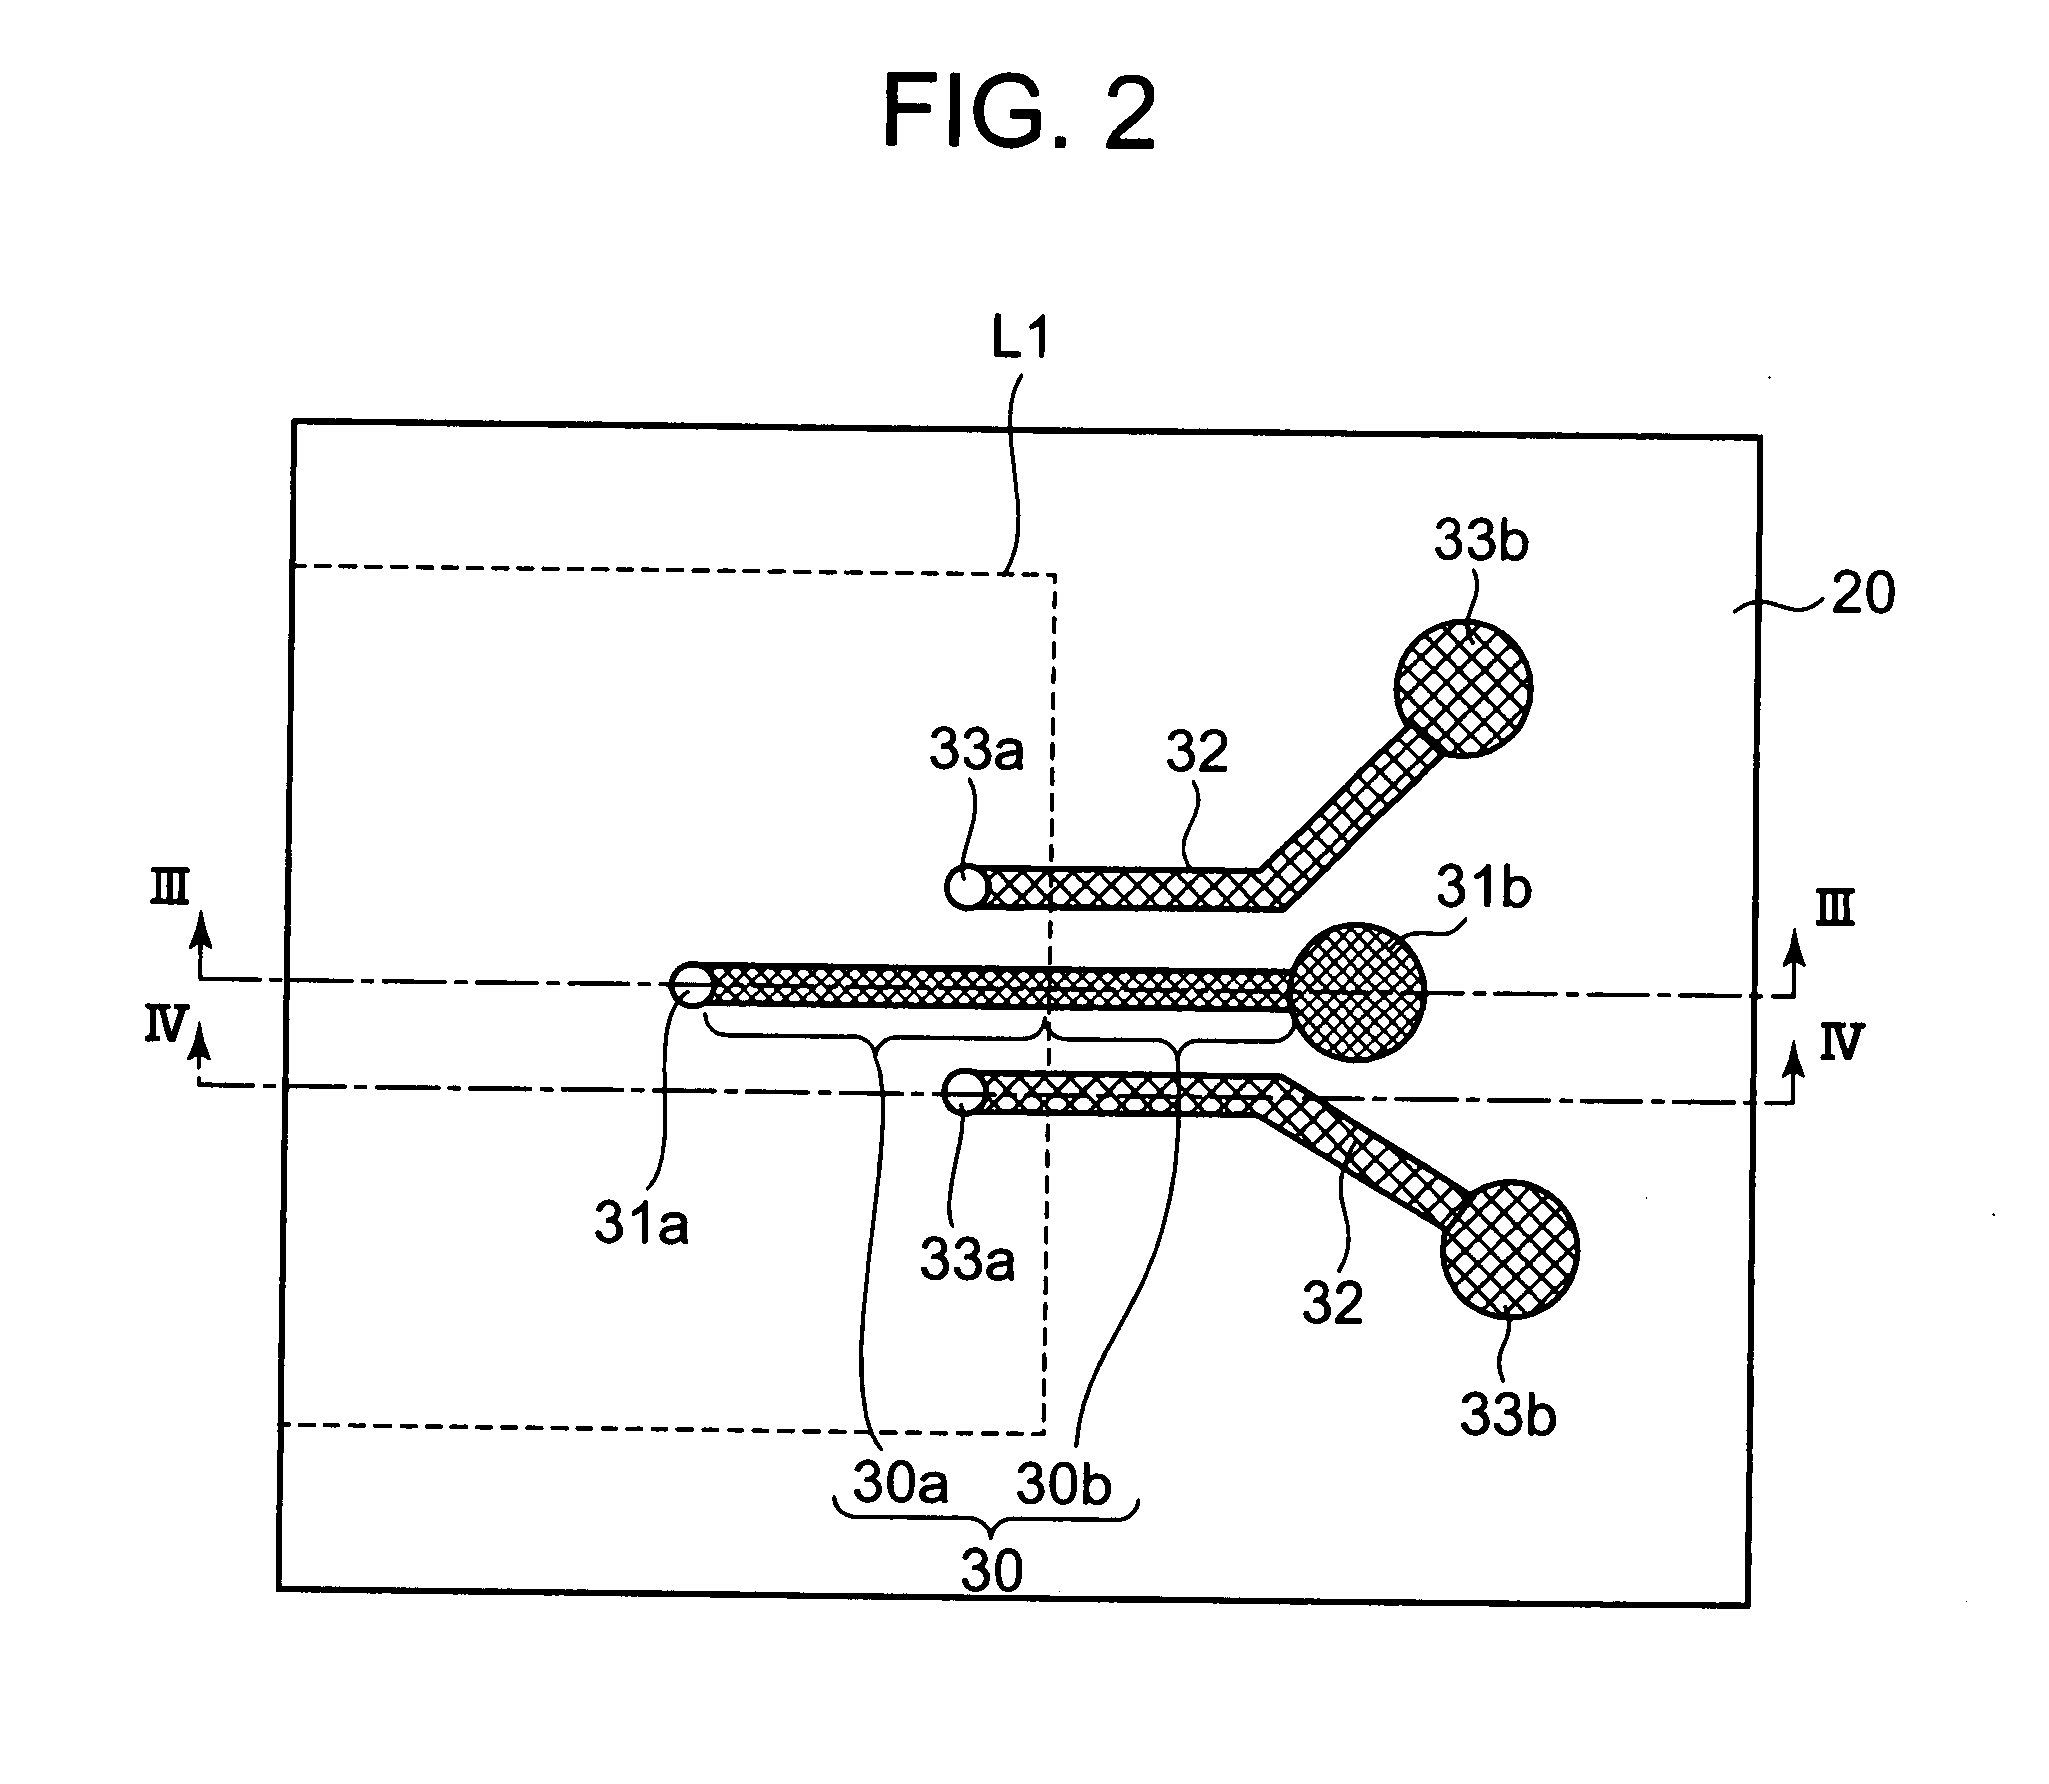 Semiconductor device including microstrip line and coplanar line